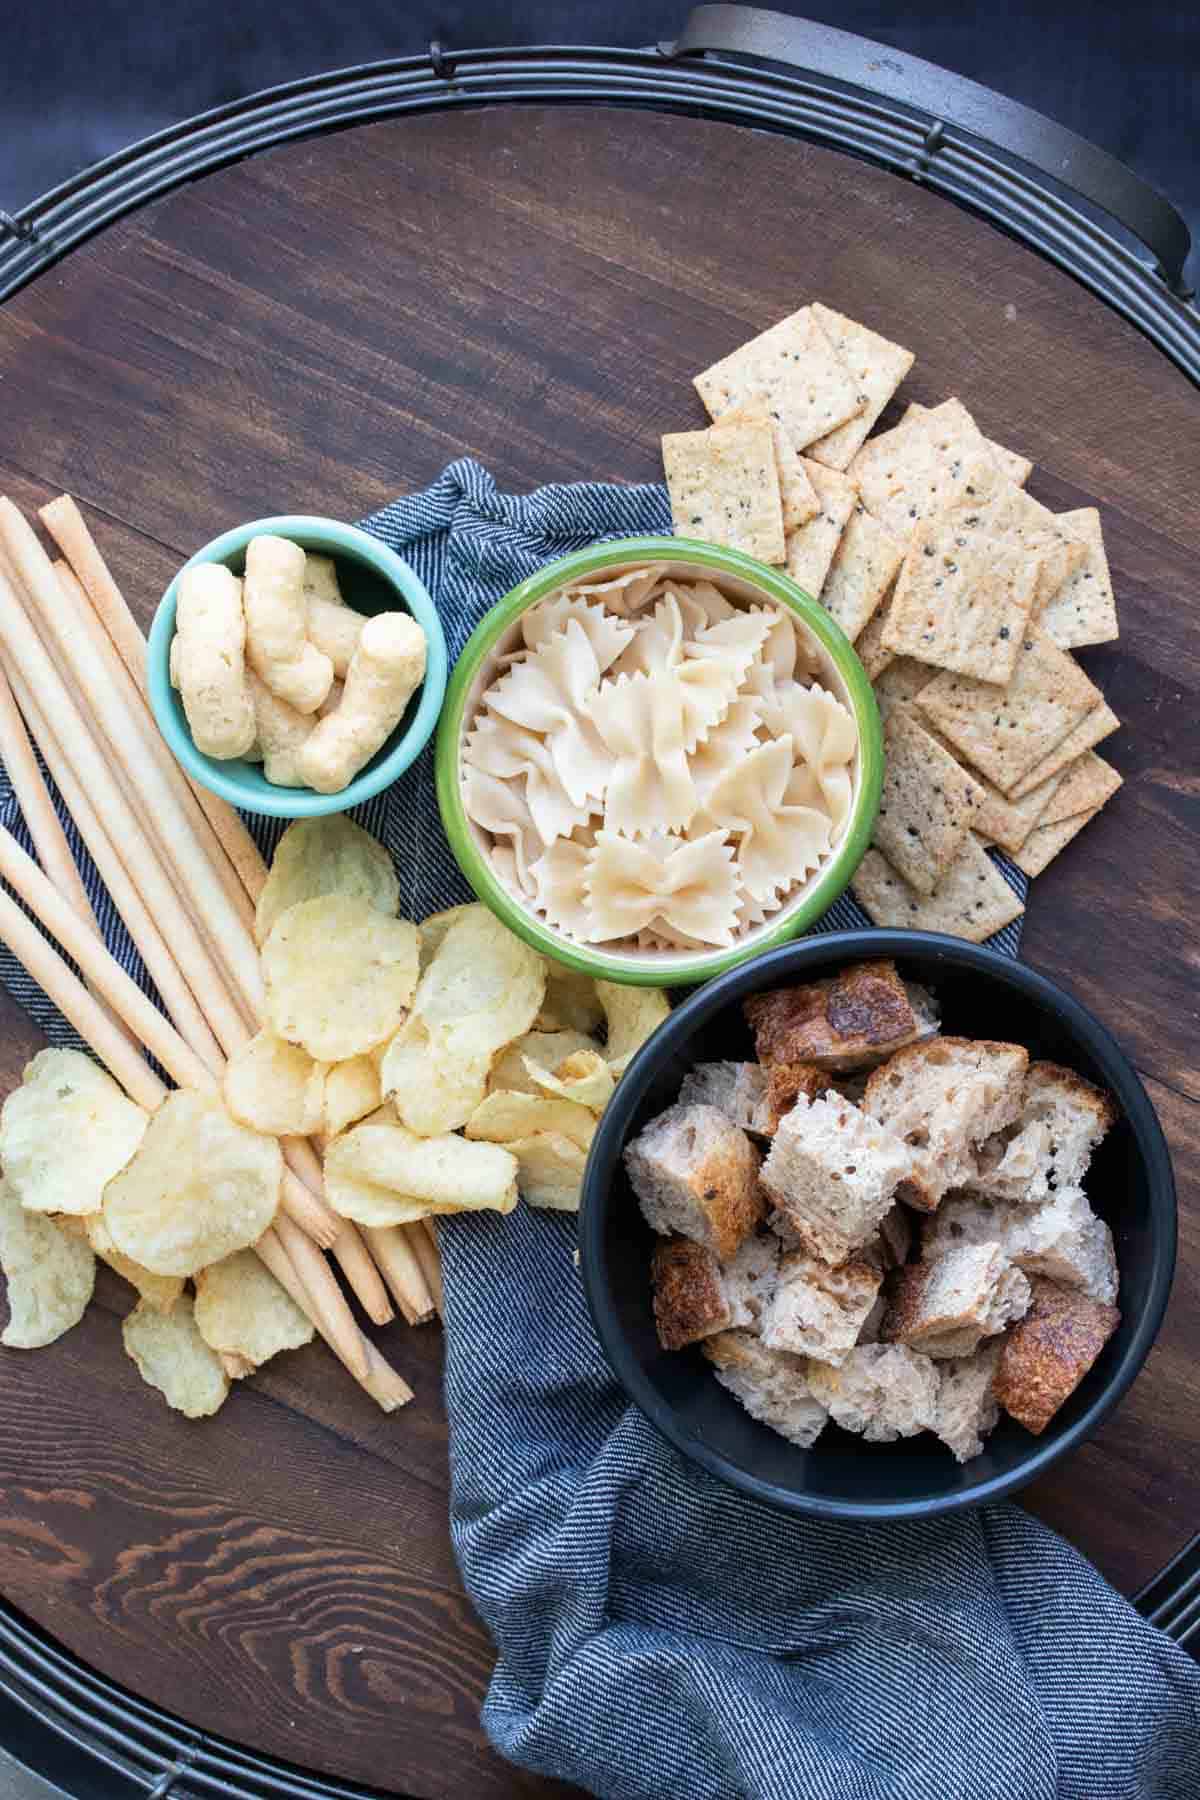 Different kinds of crackers, bread, snacks and pasta in bowls.